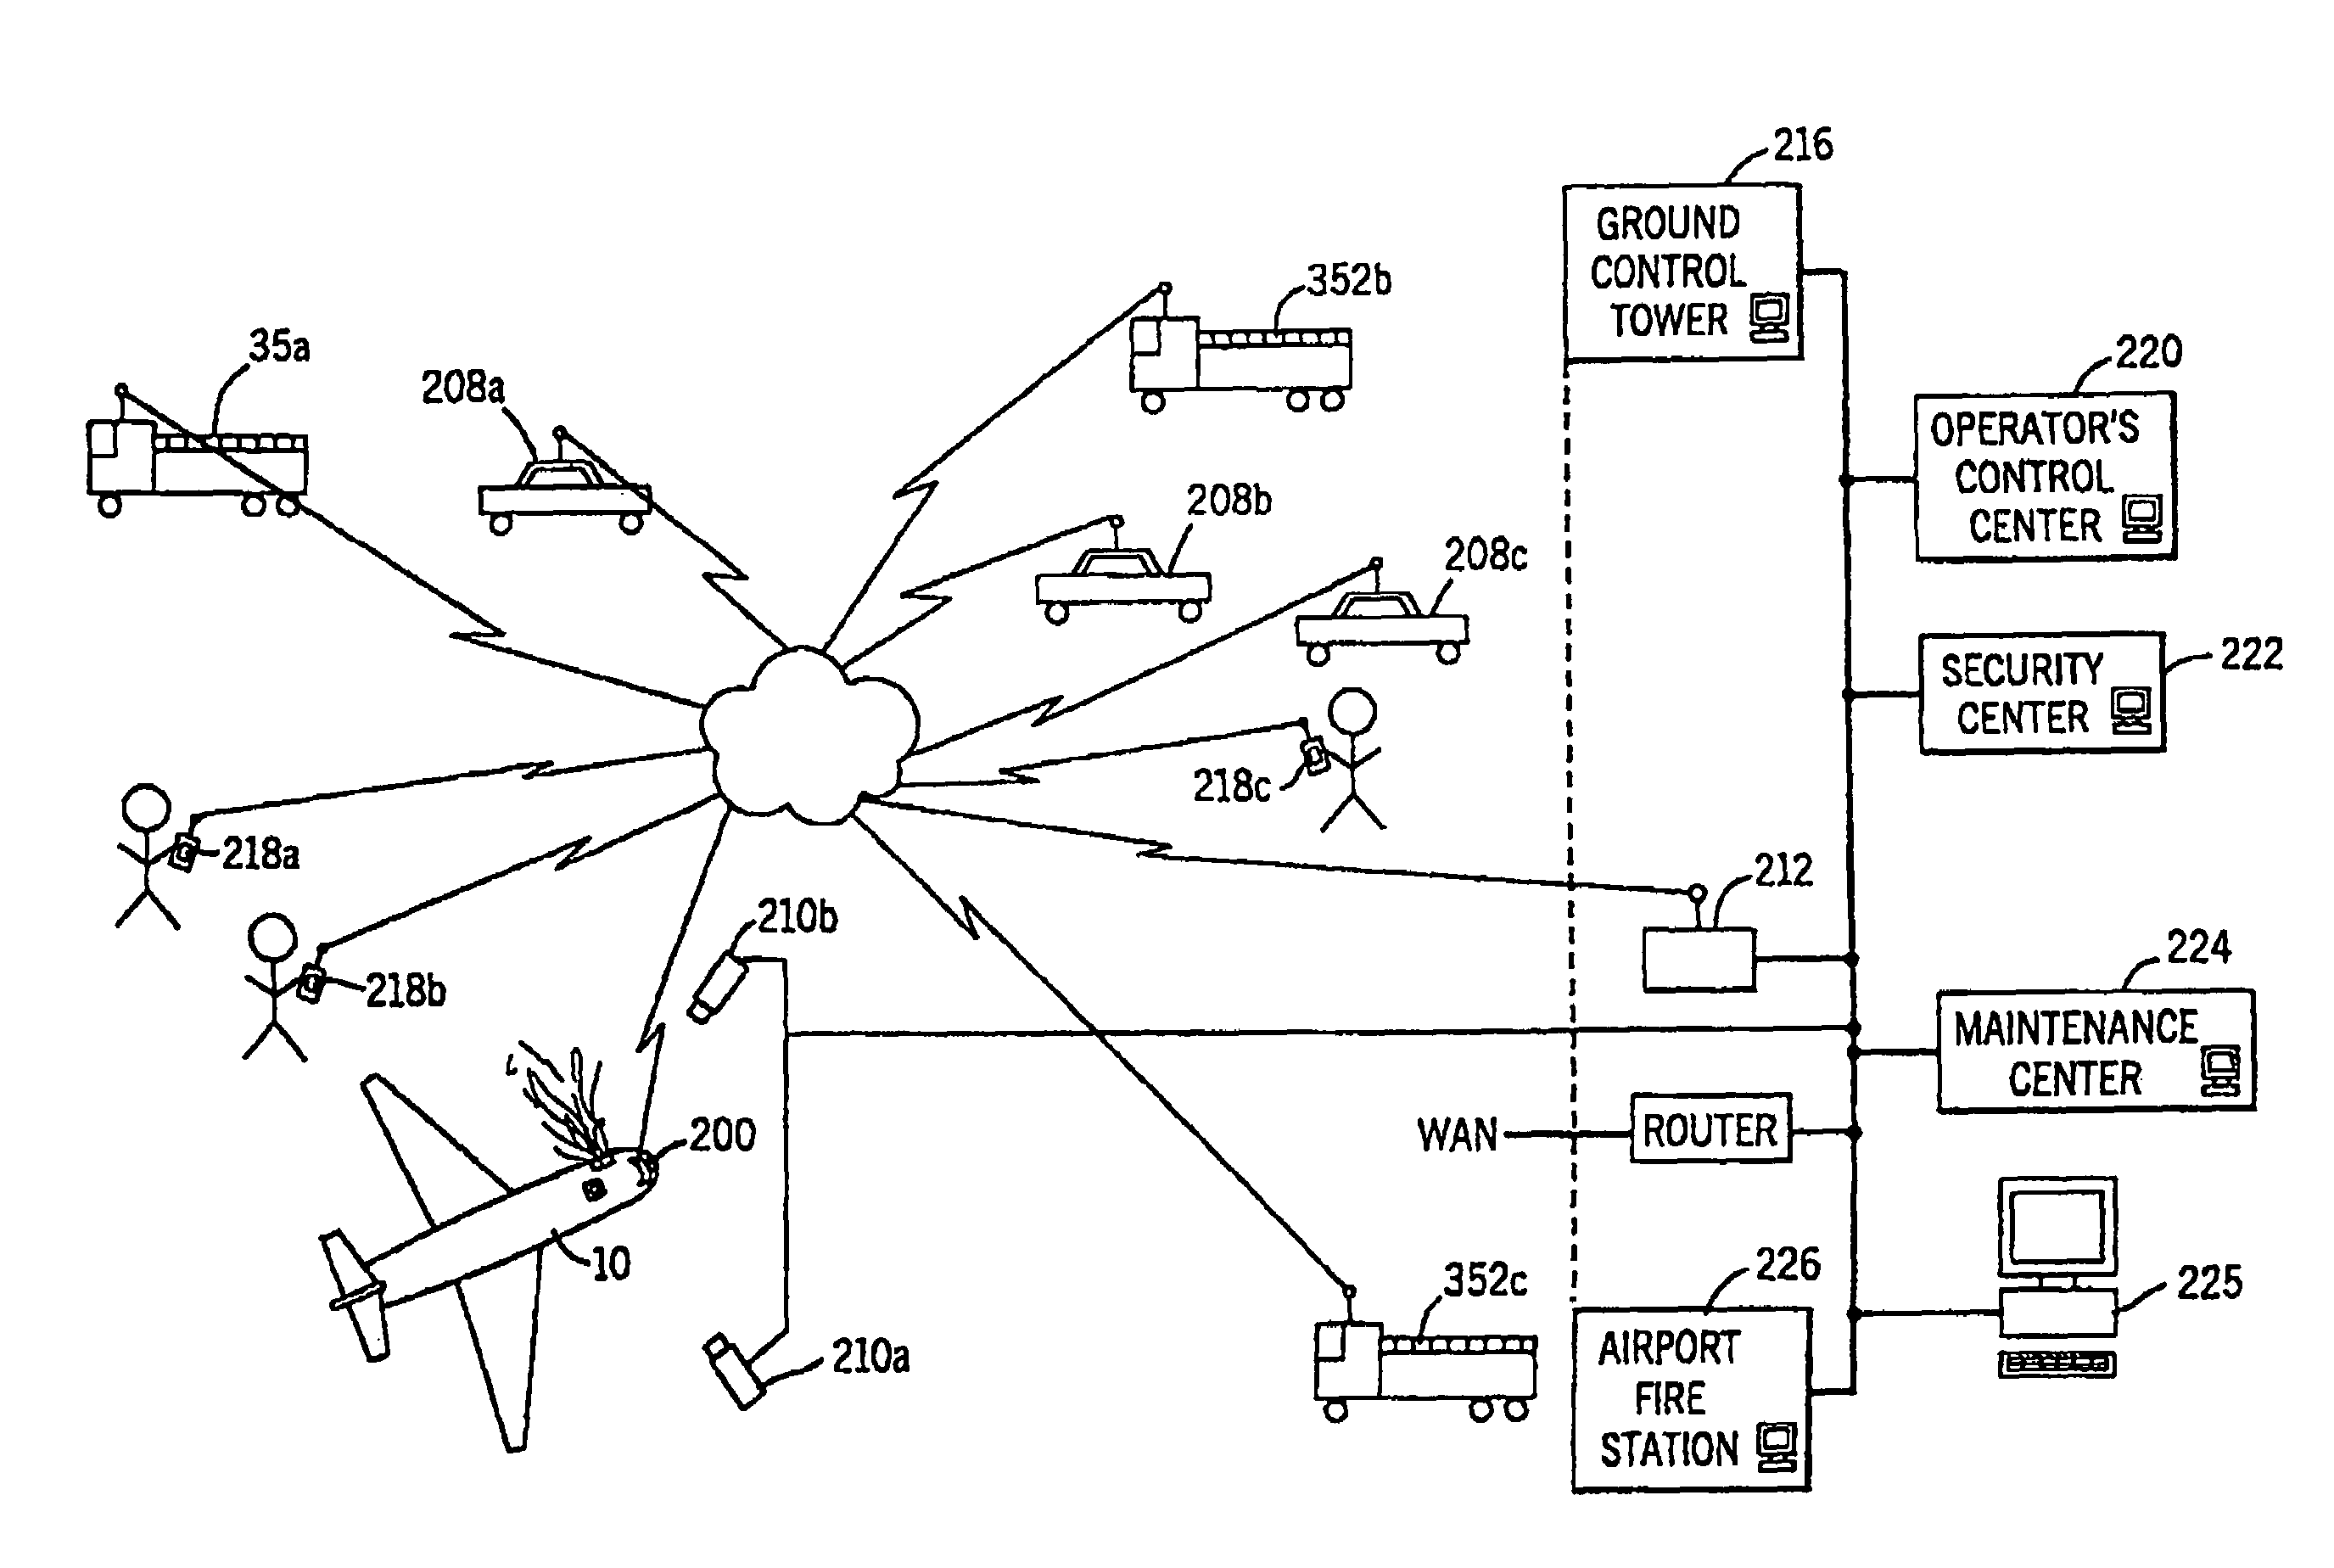 Apparatus and method of collecting and distributing event data to strategic security personnel and response vehicles